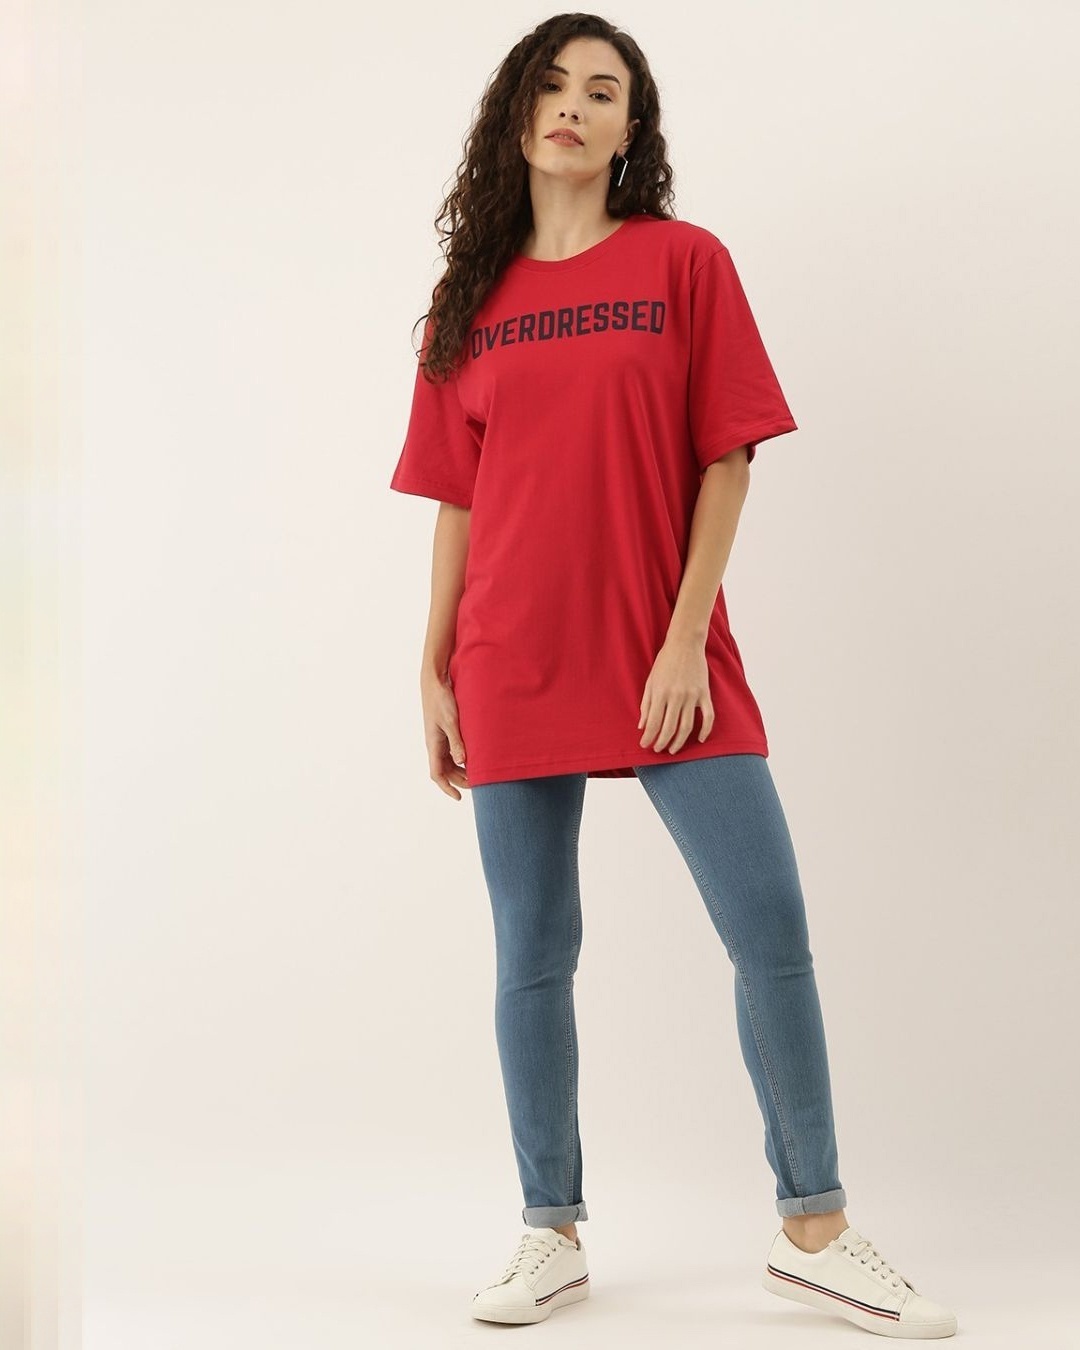 Shop Women's Red Typography T-shirt